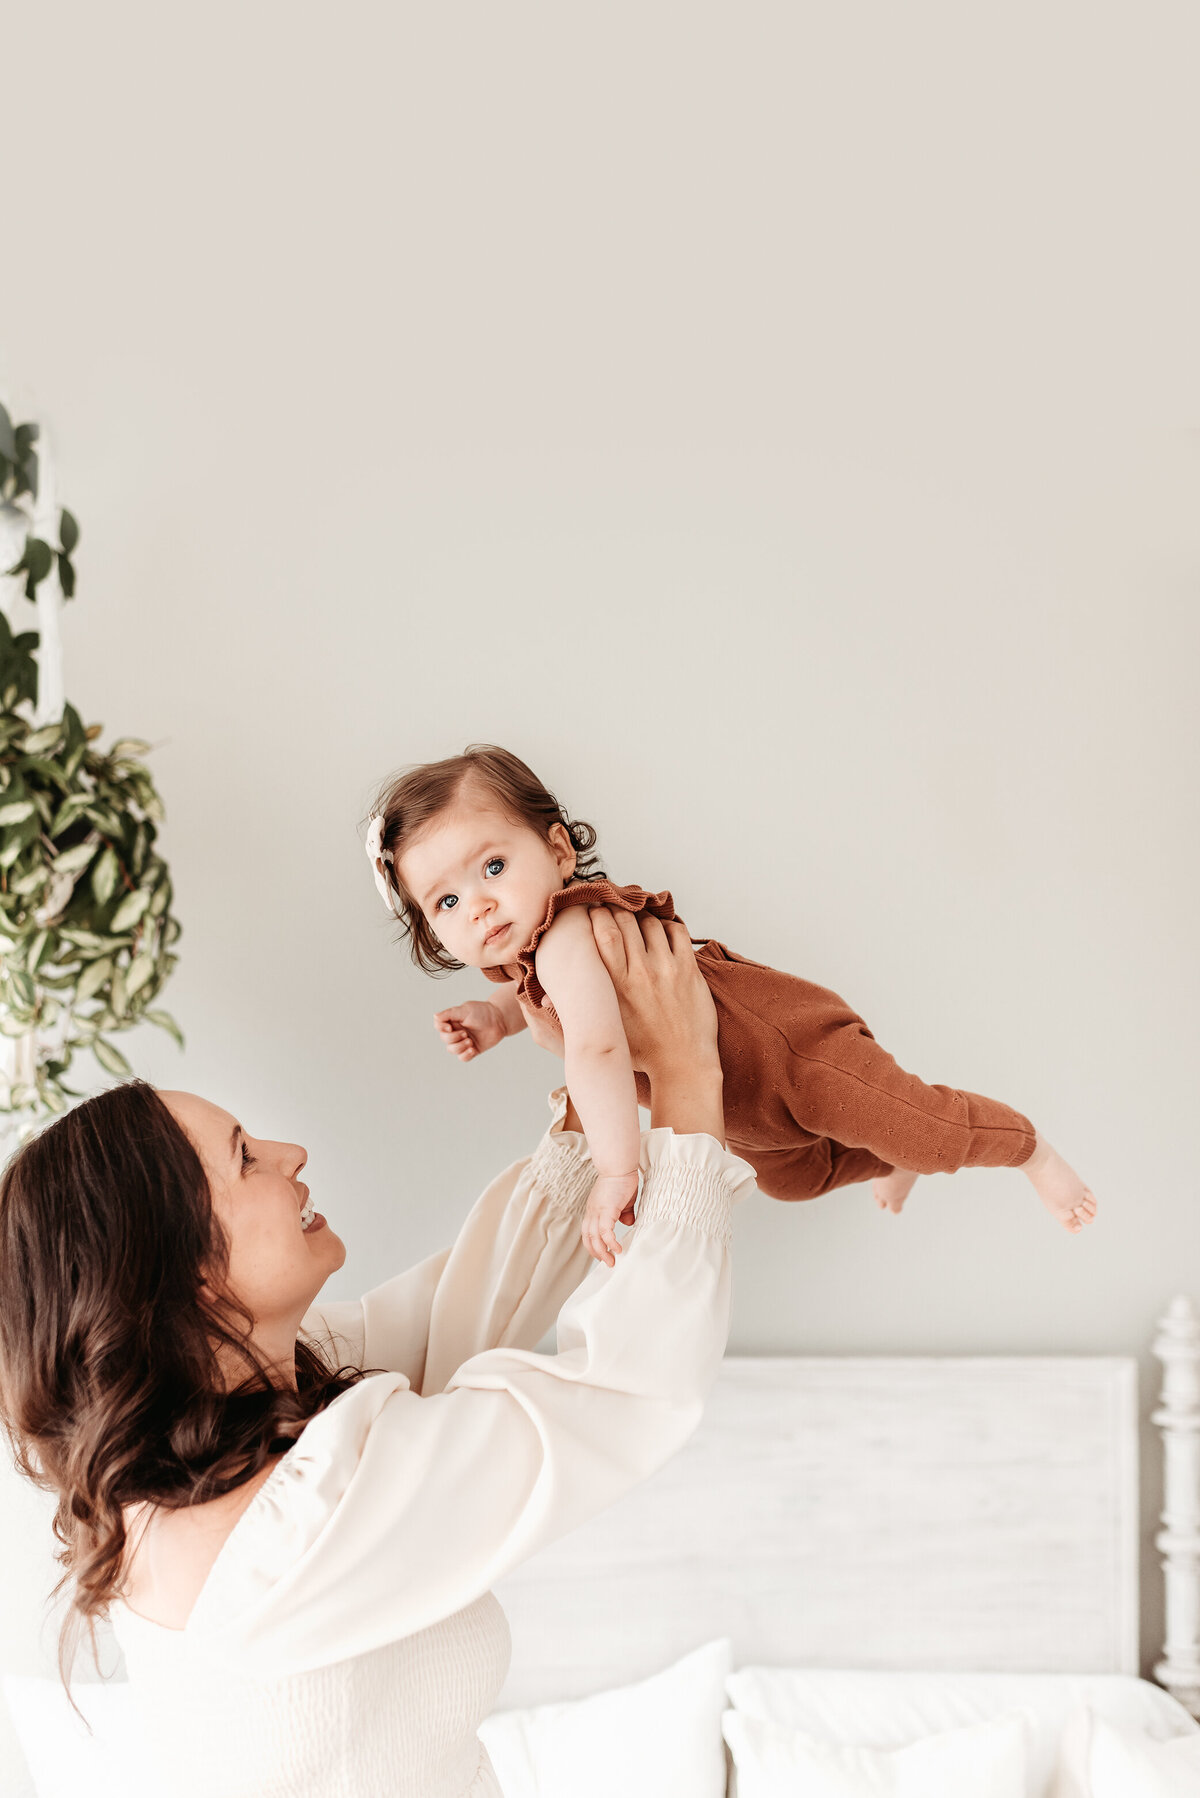 mom lifting baby girl into the air